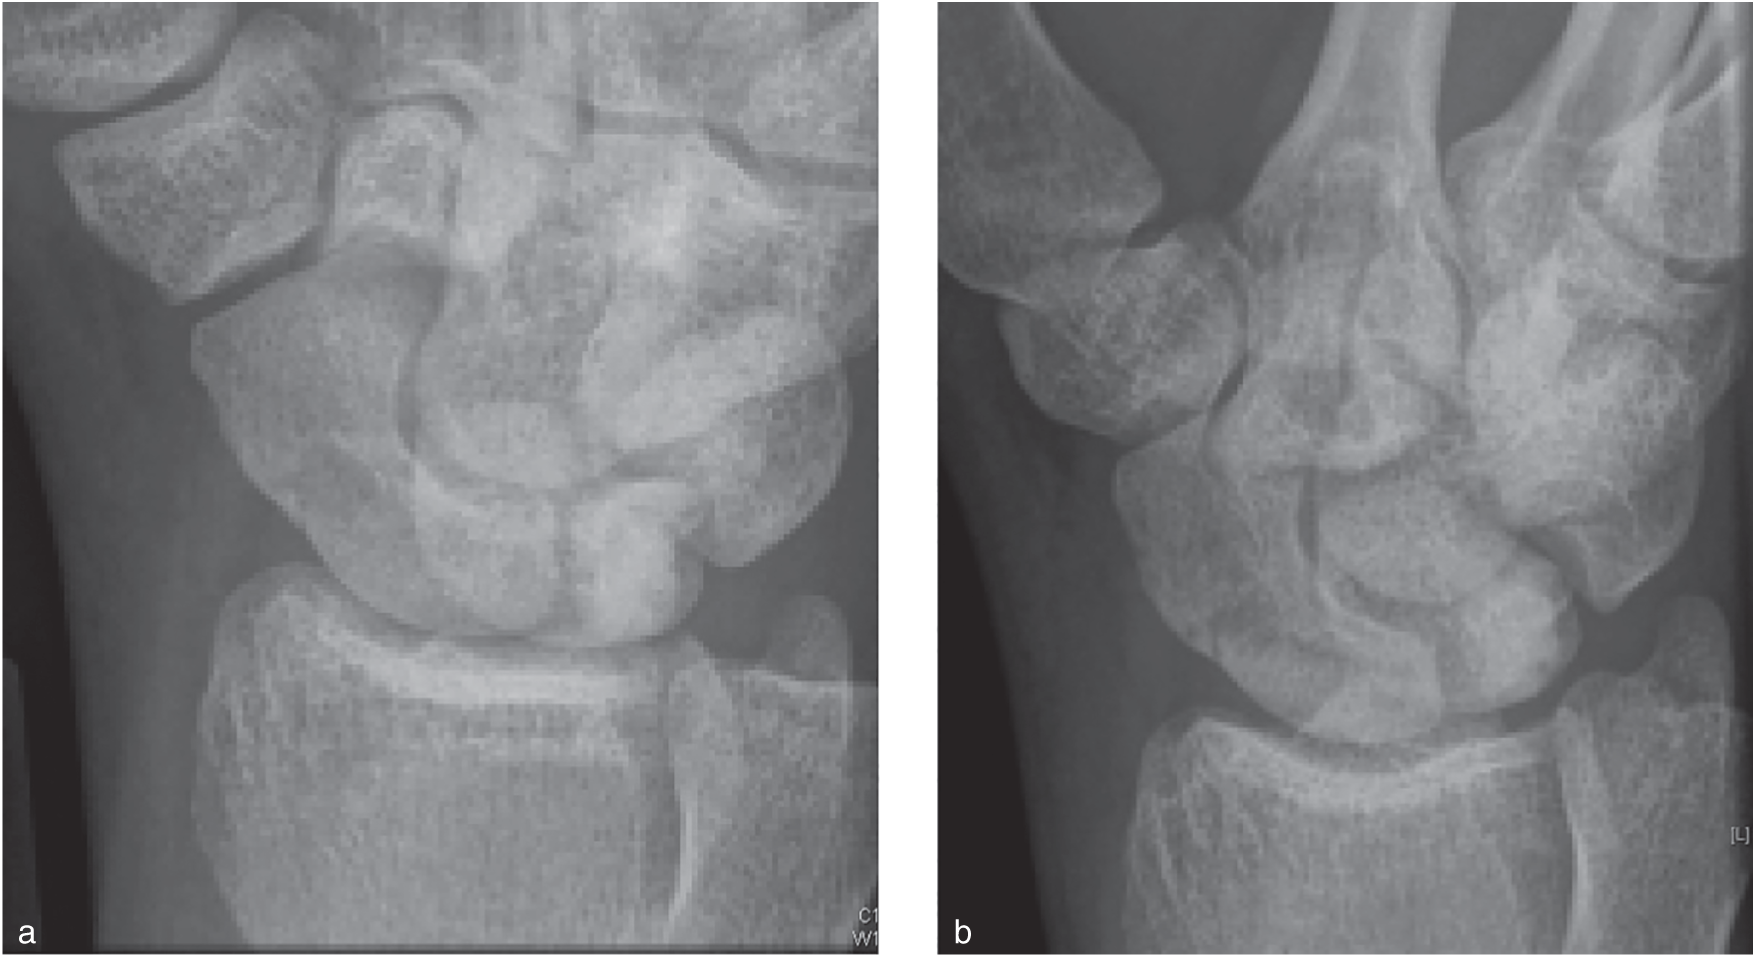 Photos depict Pronated oblique view of the same patient in Figure 89.1: (A) following the injury, there was a doubt about a waist fracture; (B) 10 days later, radiograph reveals more clearly the waist fracture.